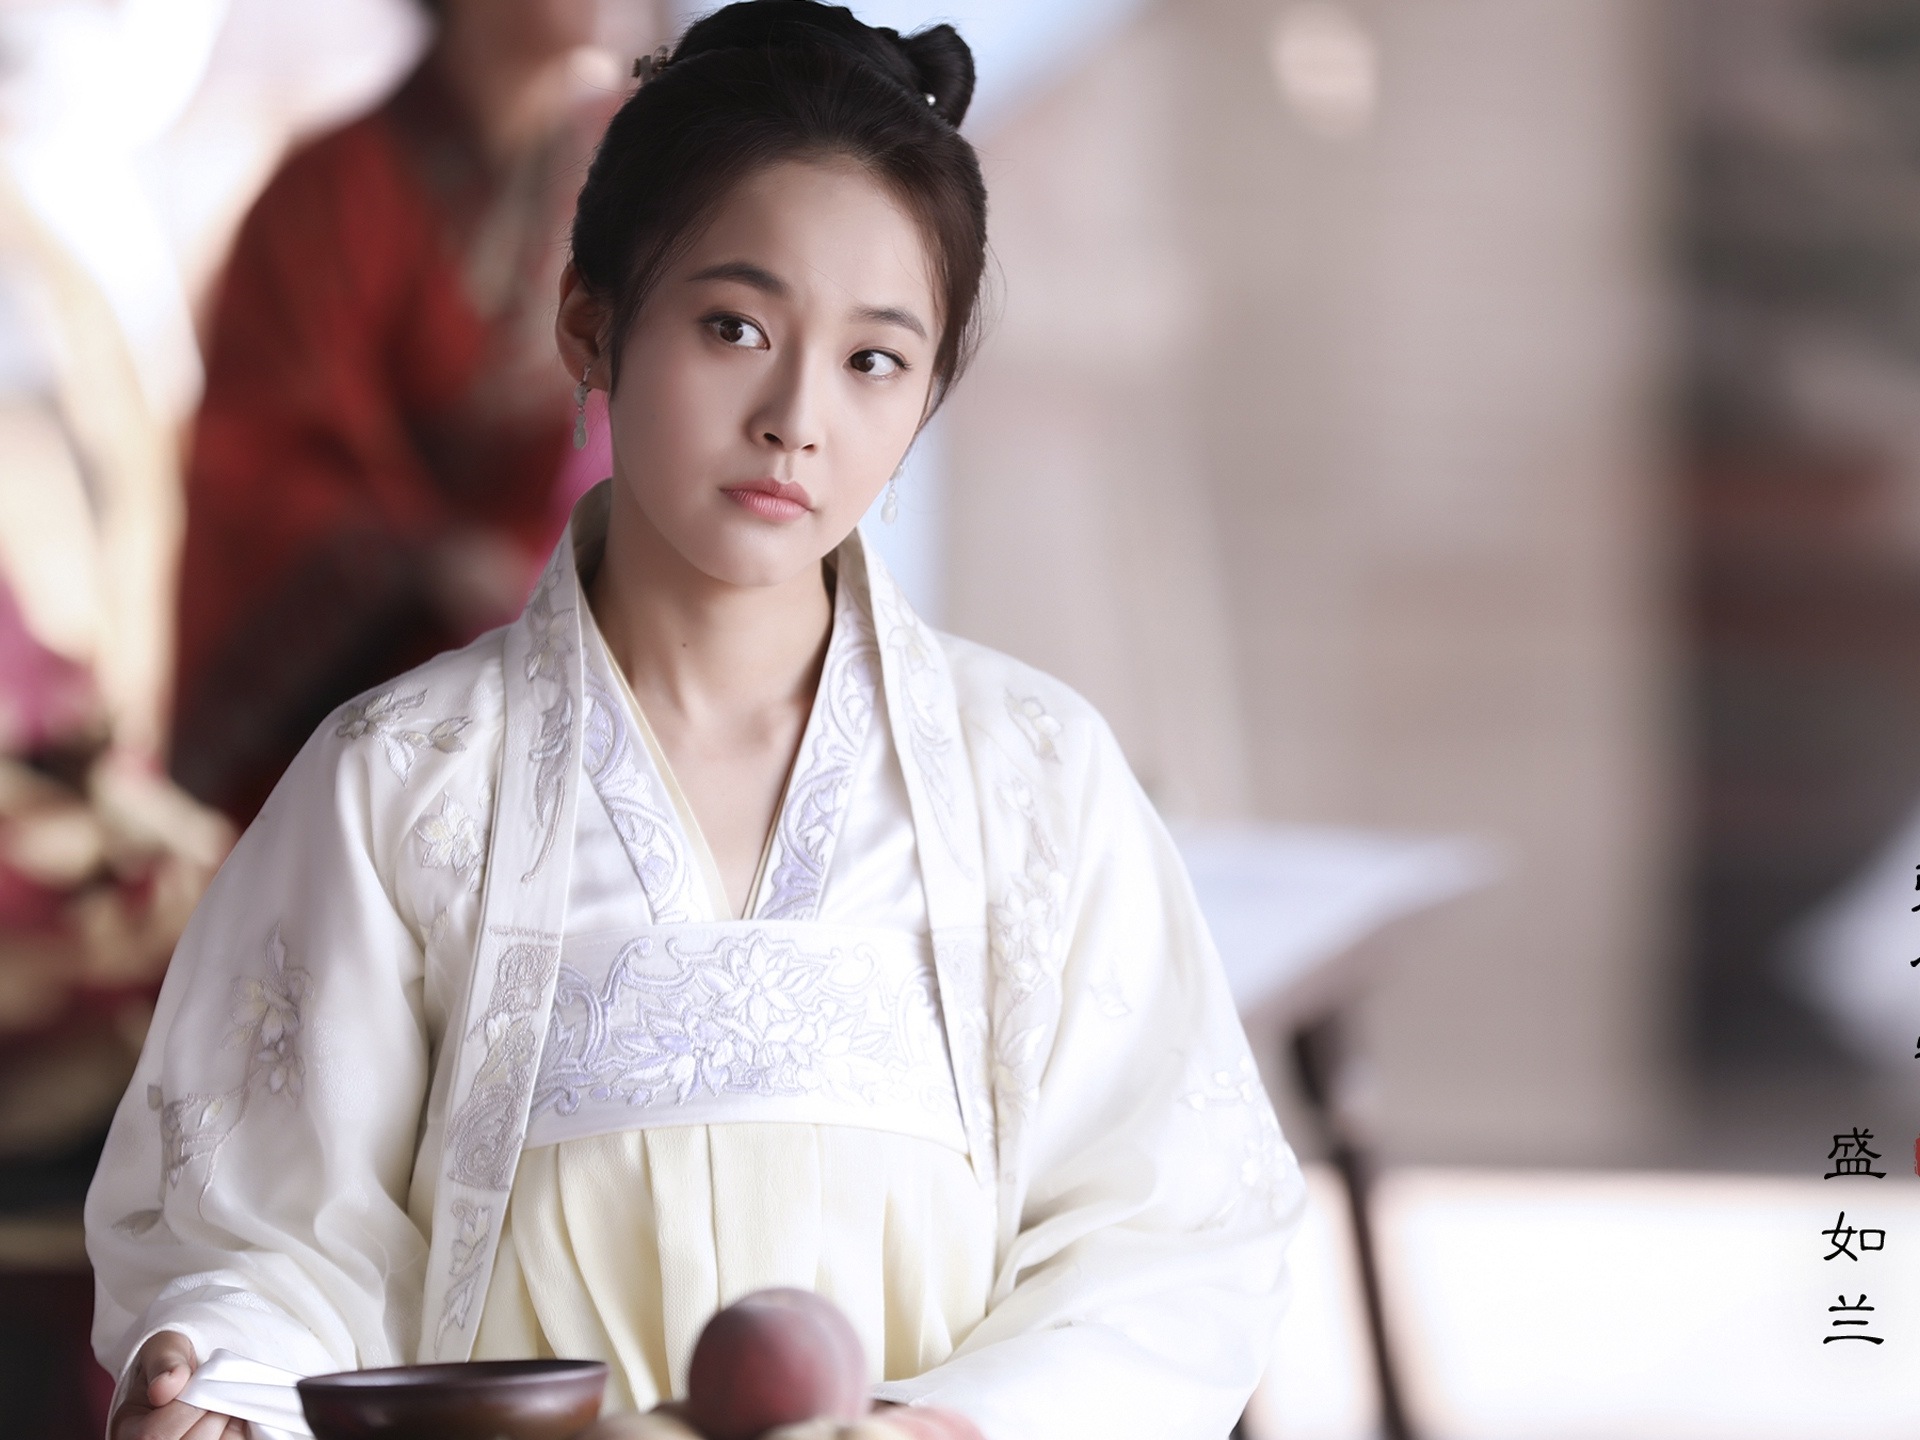 The Story Of MingLan, TV series HD wallpapers #33 - 1920x1440